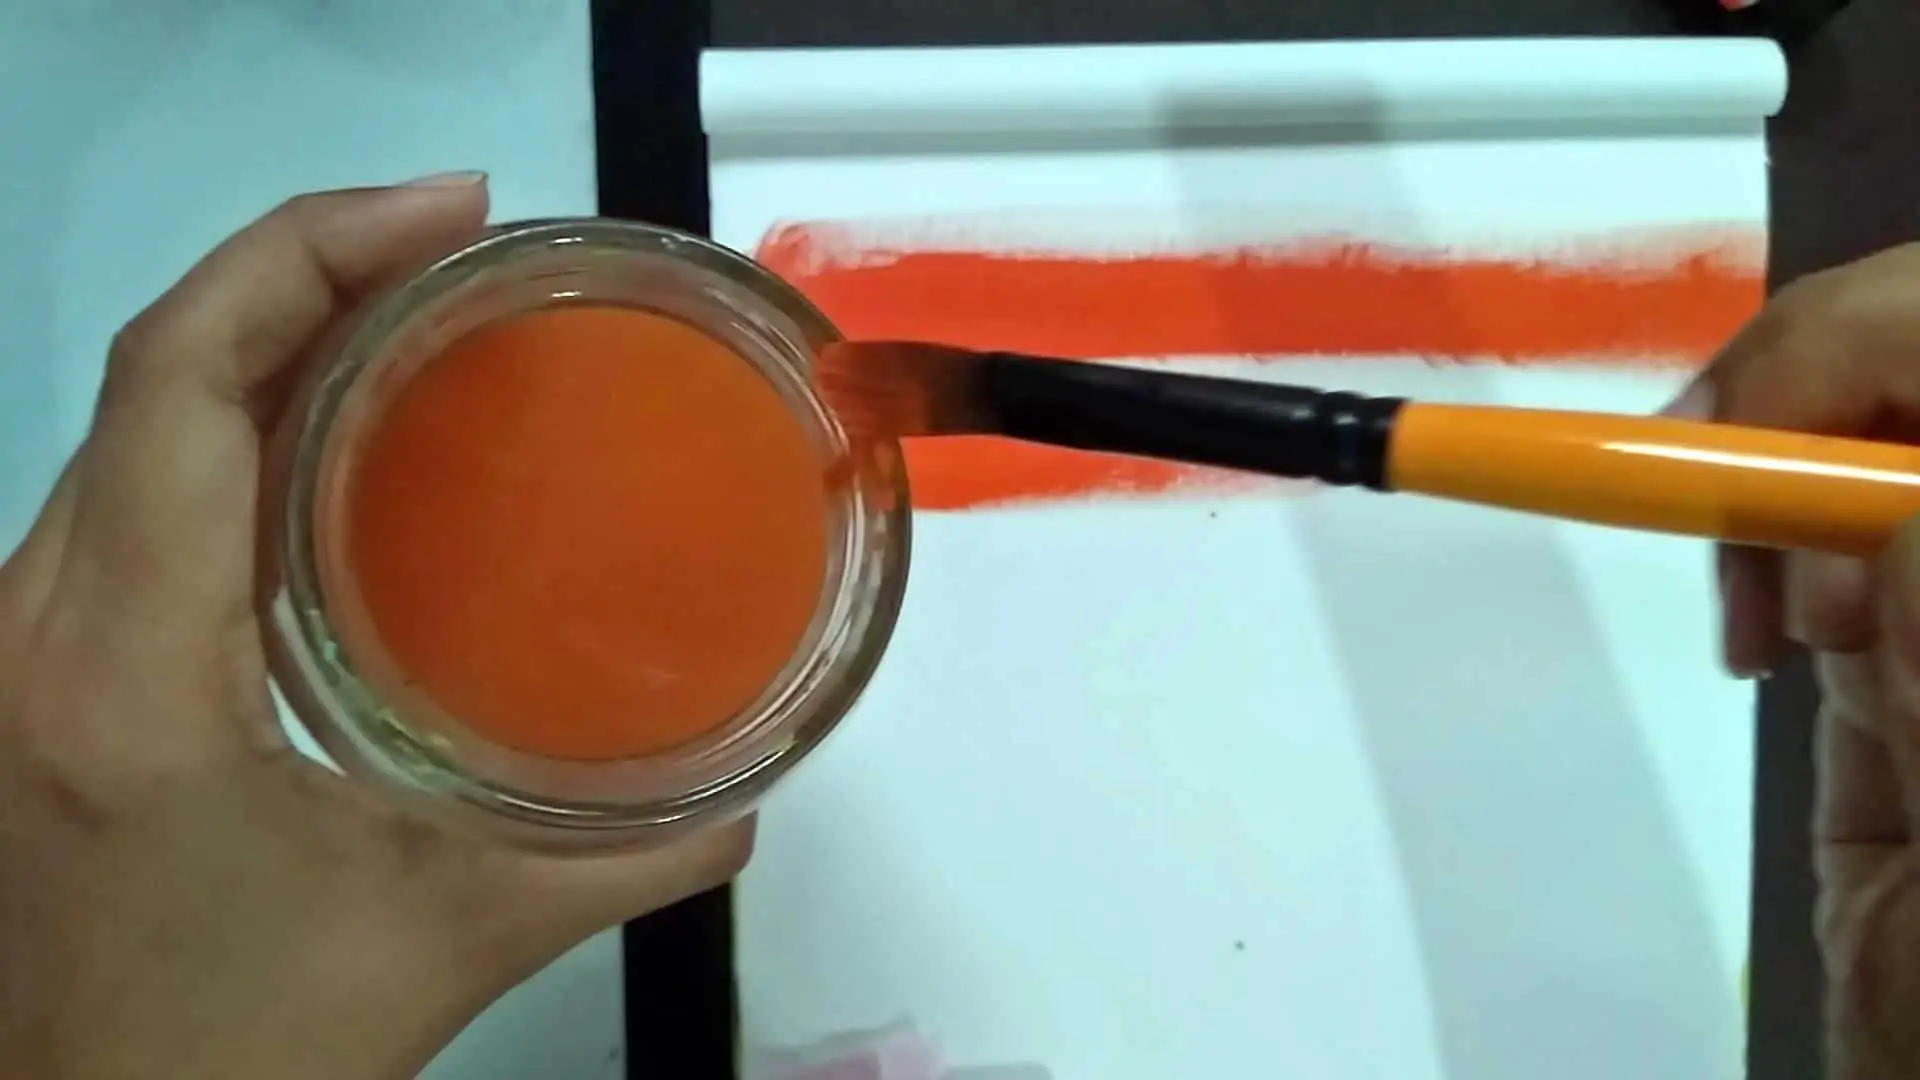 Do you have to wet the brush before acrylic painting?